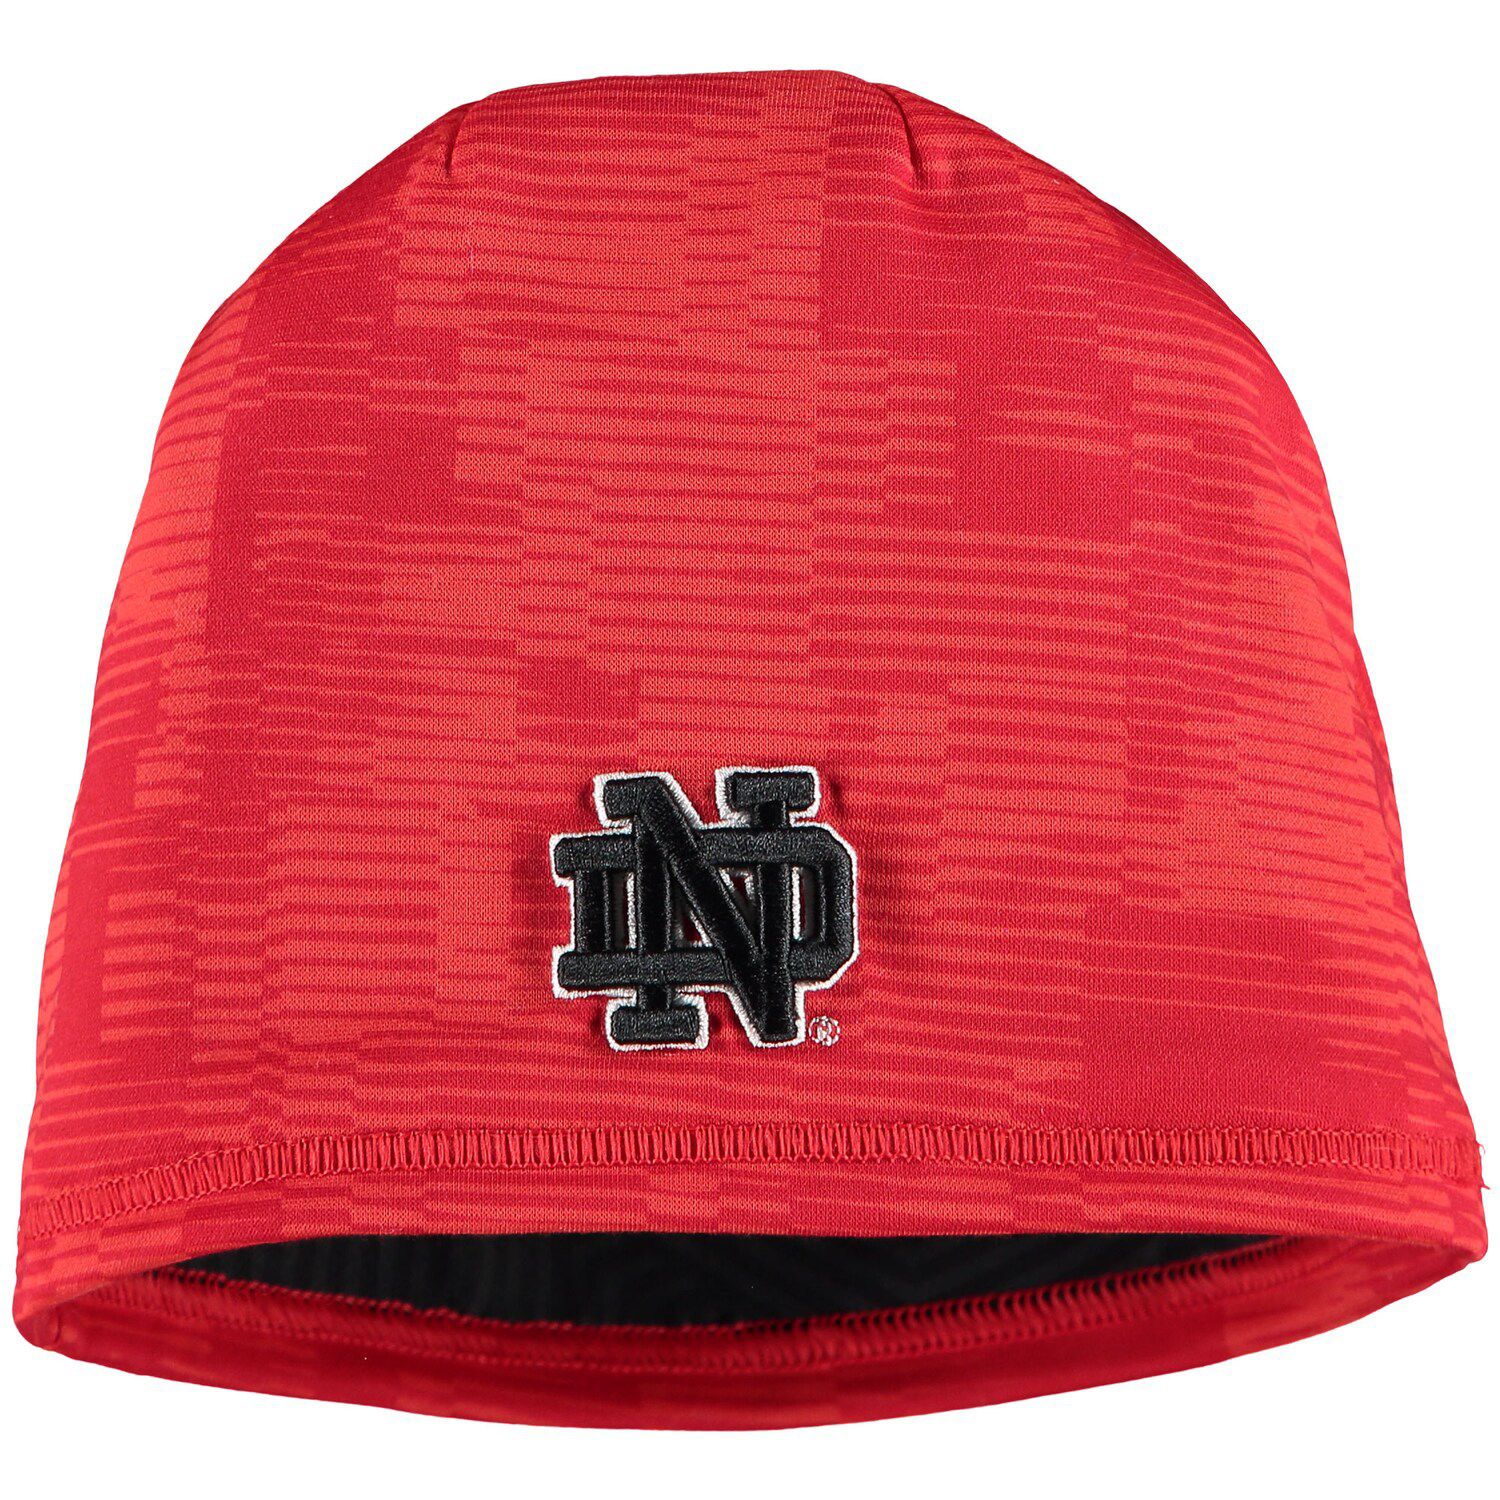 notre dame red hat